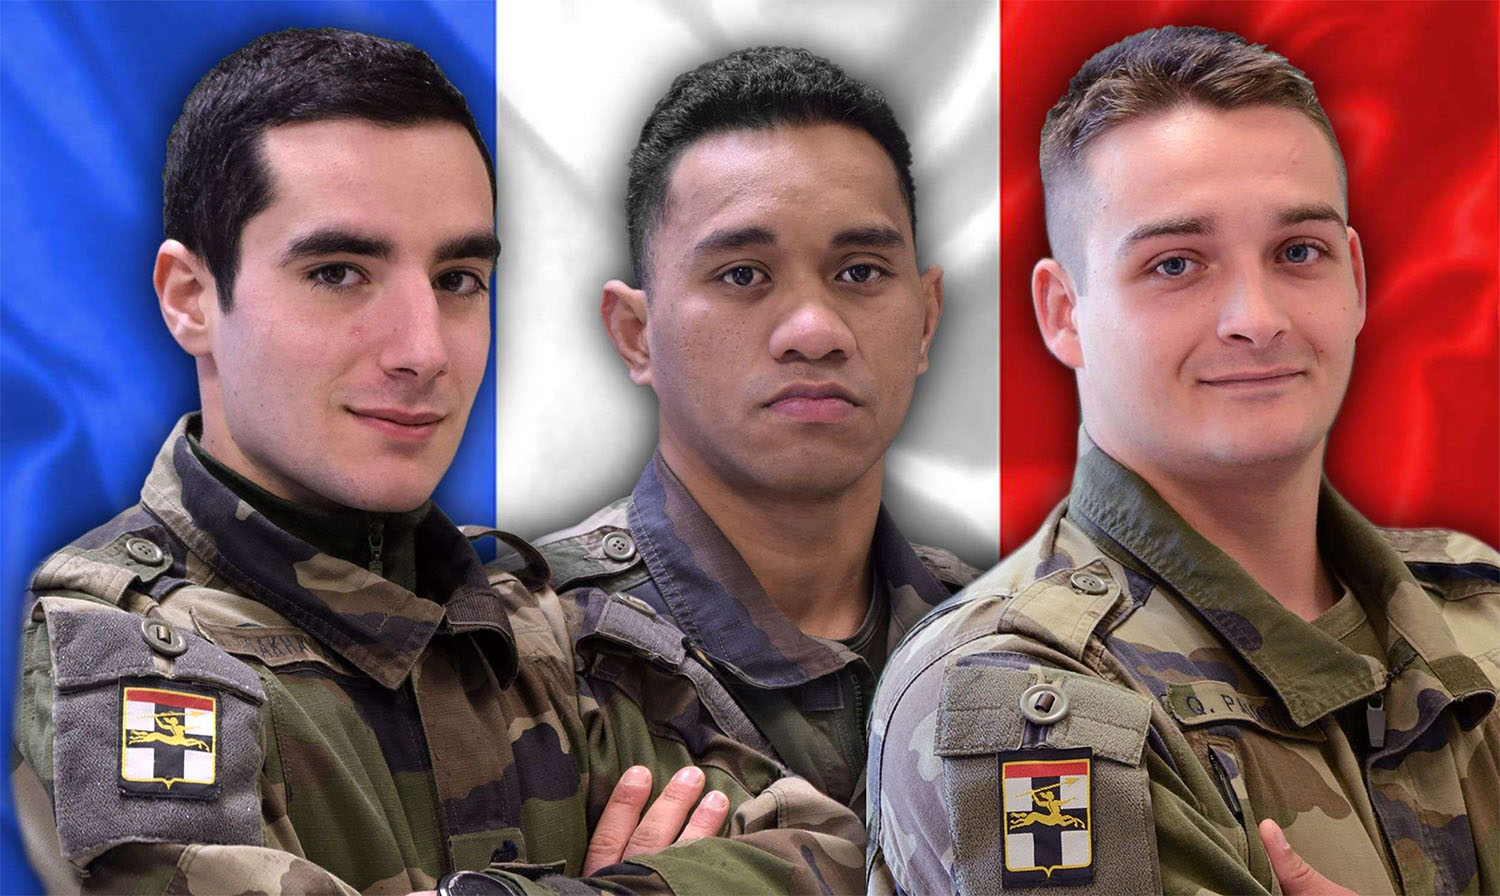 The deaths brought to 47 the number of French soldiers killed in Mali since France first intervened militarily in January 2013